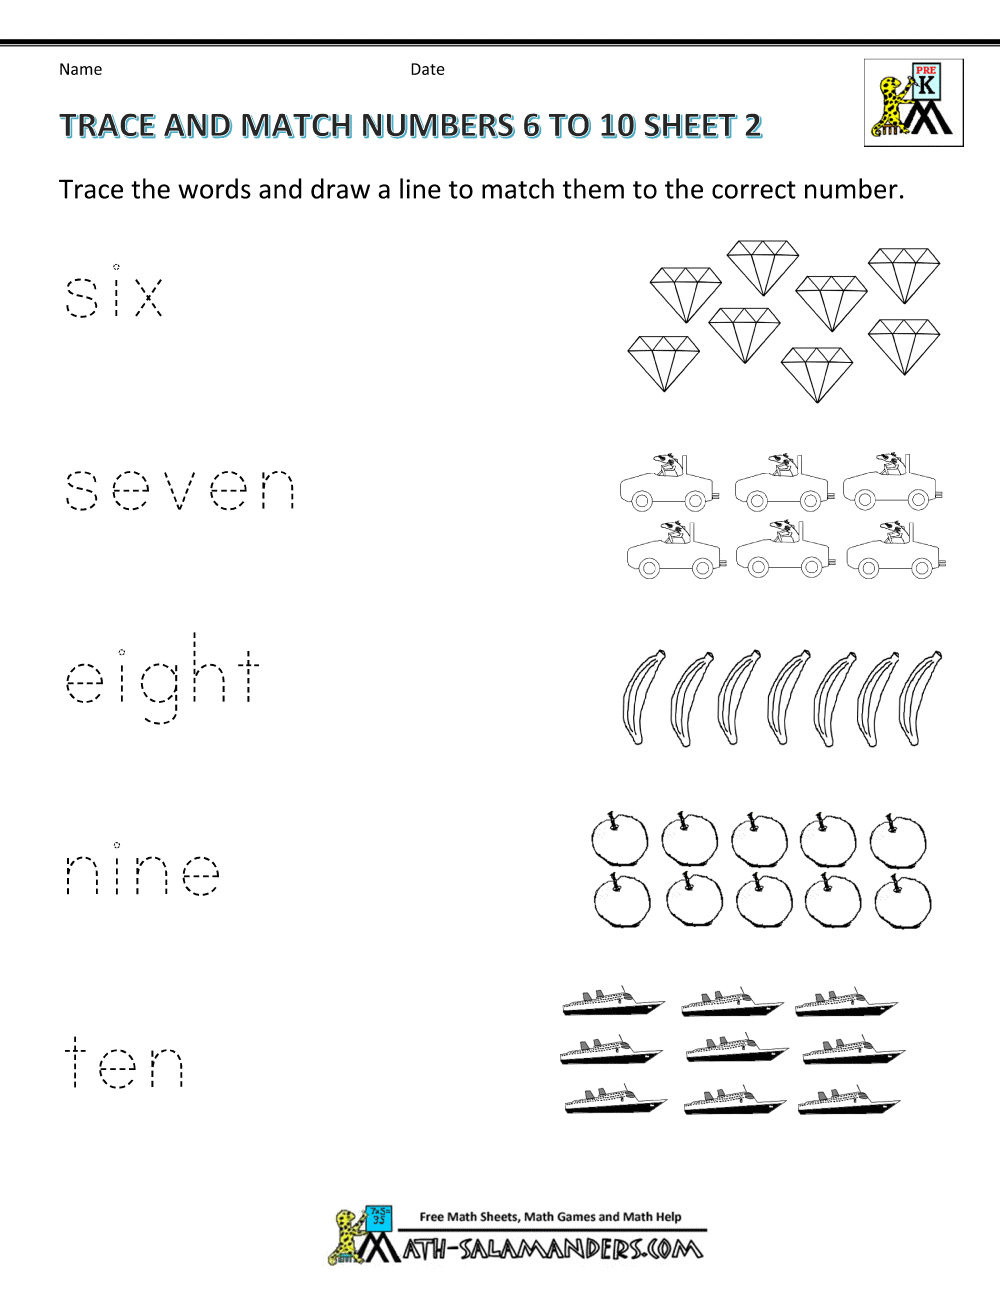 Worksheets matching numbers 1 10 Counting Numbers